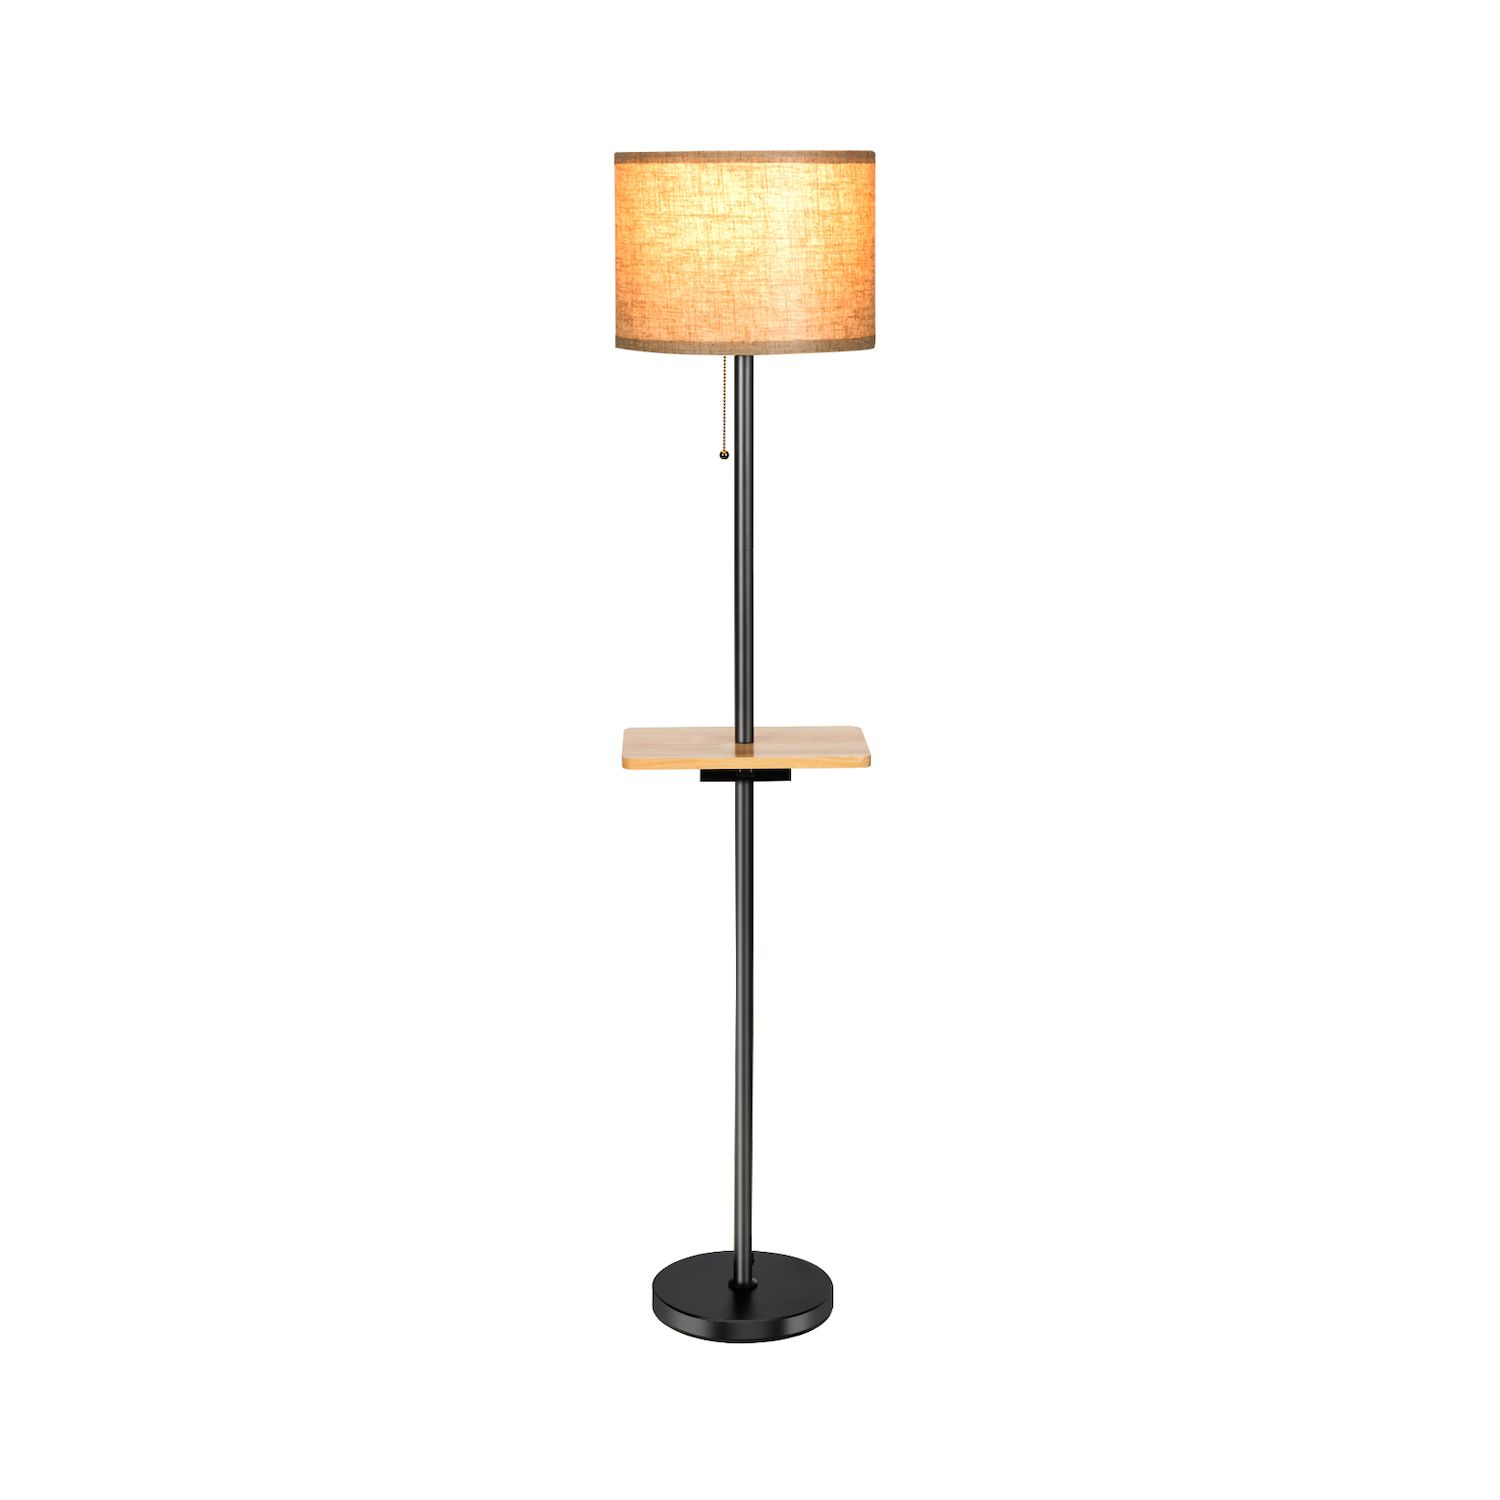 HOMCOM Modern Floor Lamp with 2 Globe Lamp Shade Contemporary Decorative LED Standing Light, Gold, Size: Small